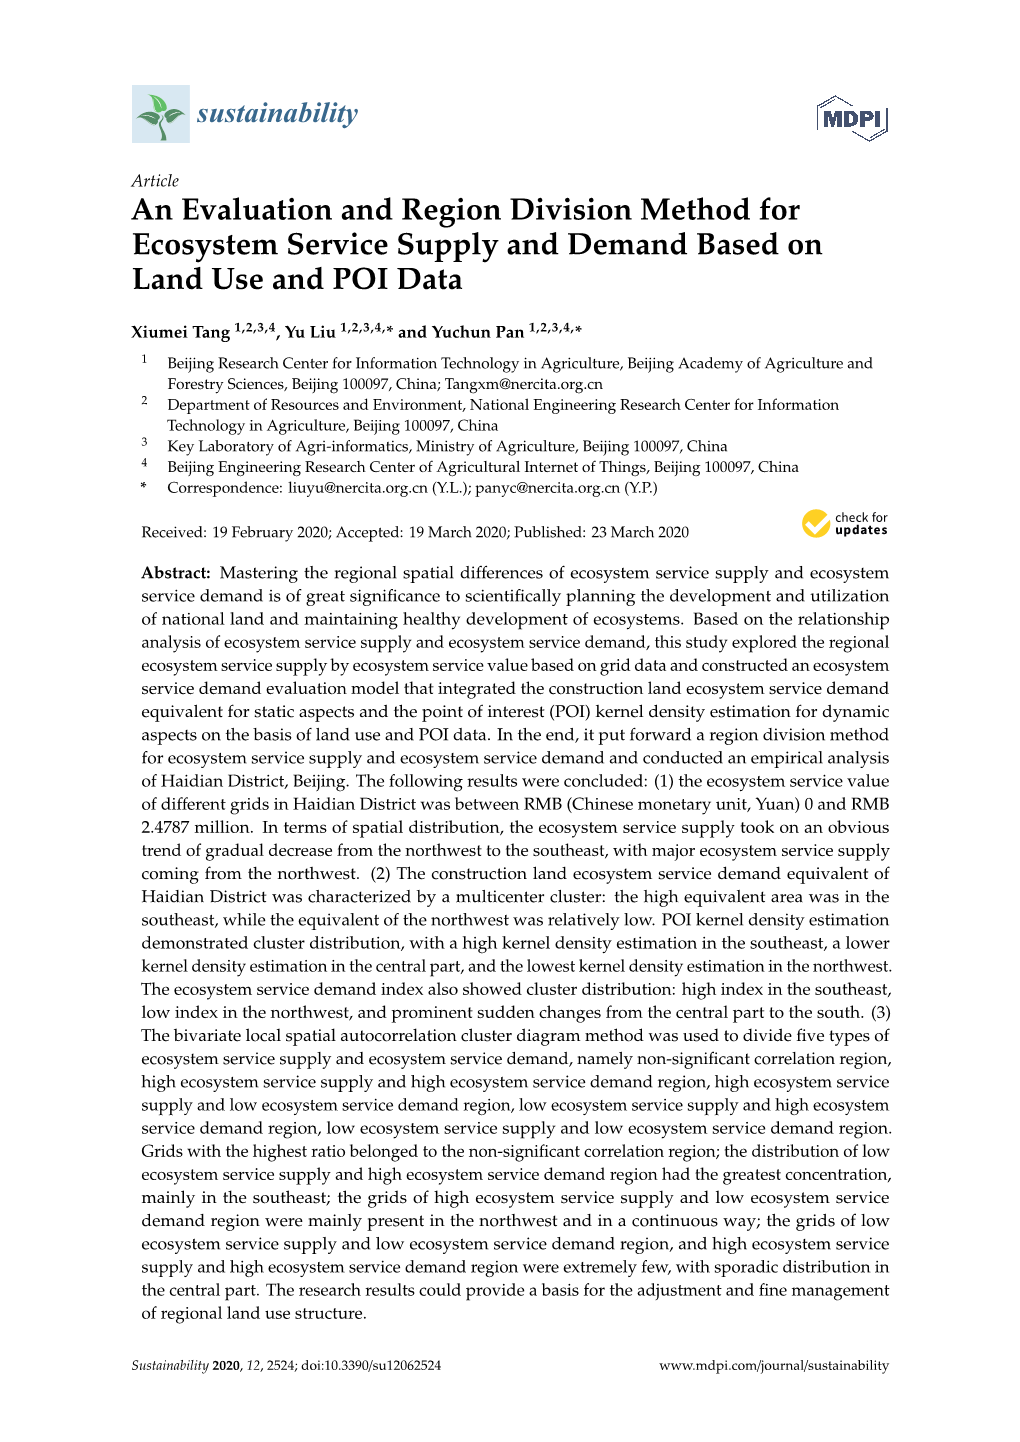 An Evaluation and Region Division Method for Ecosystem Service Supply and Demand Based on Land Use and POI Data